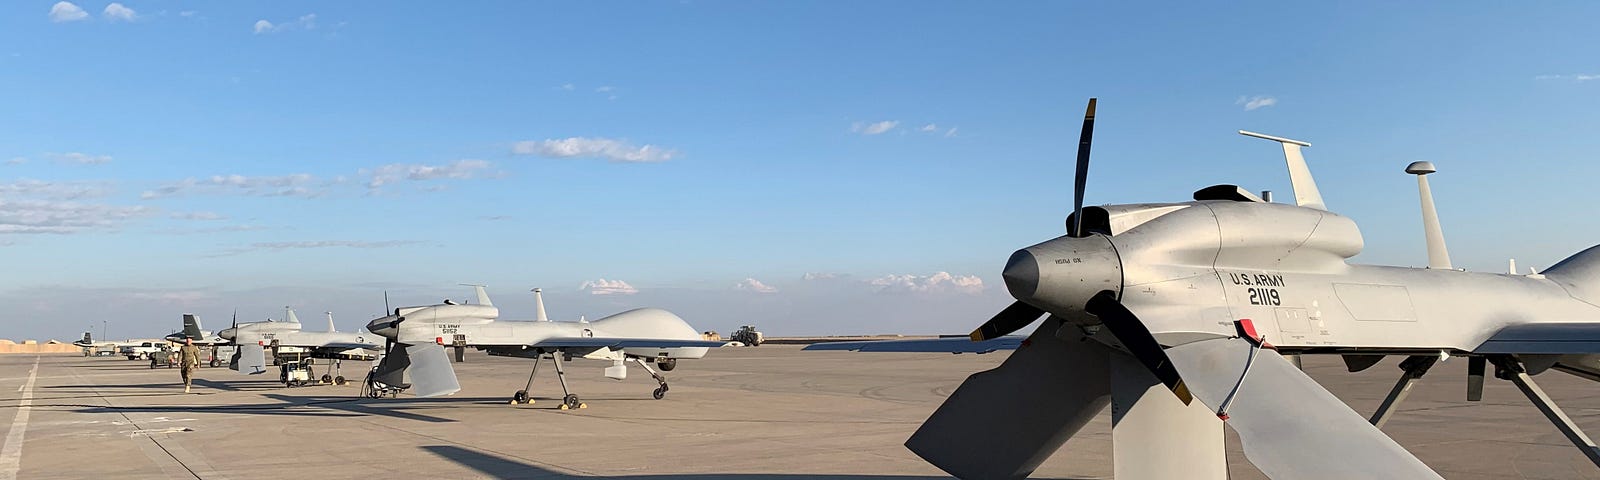 US army drones at the Ain al-Asad airbase